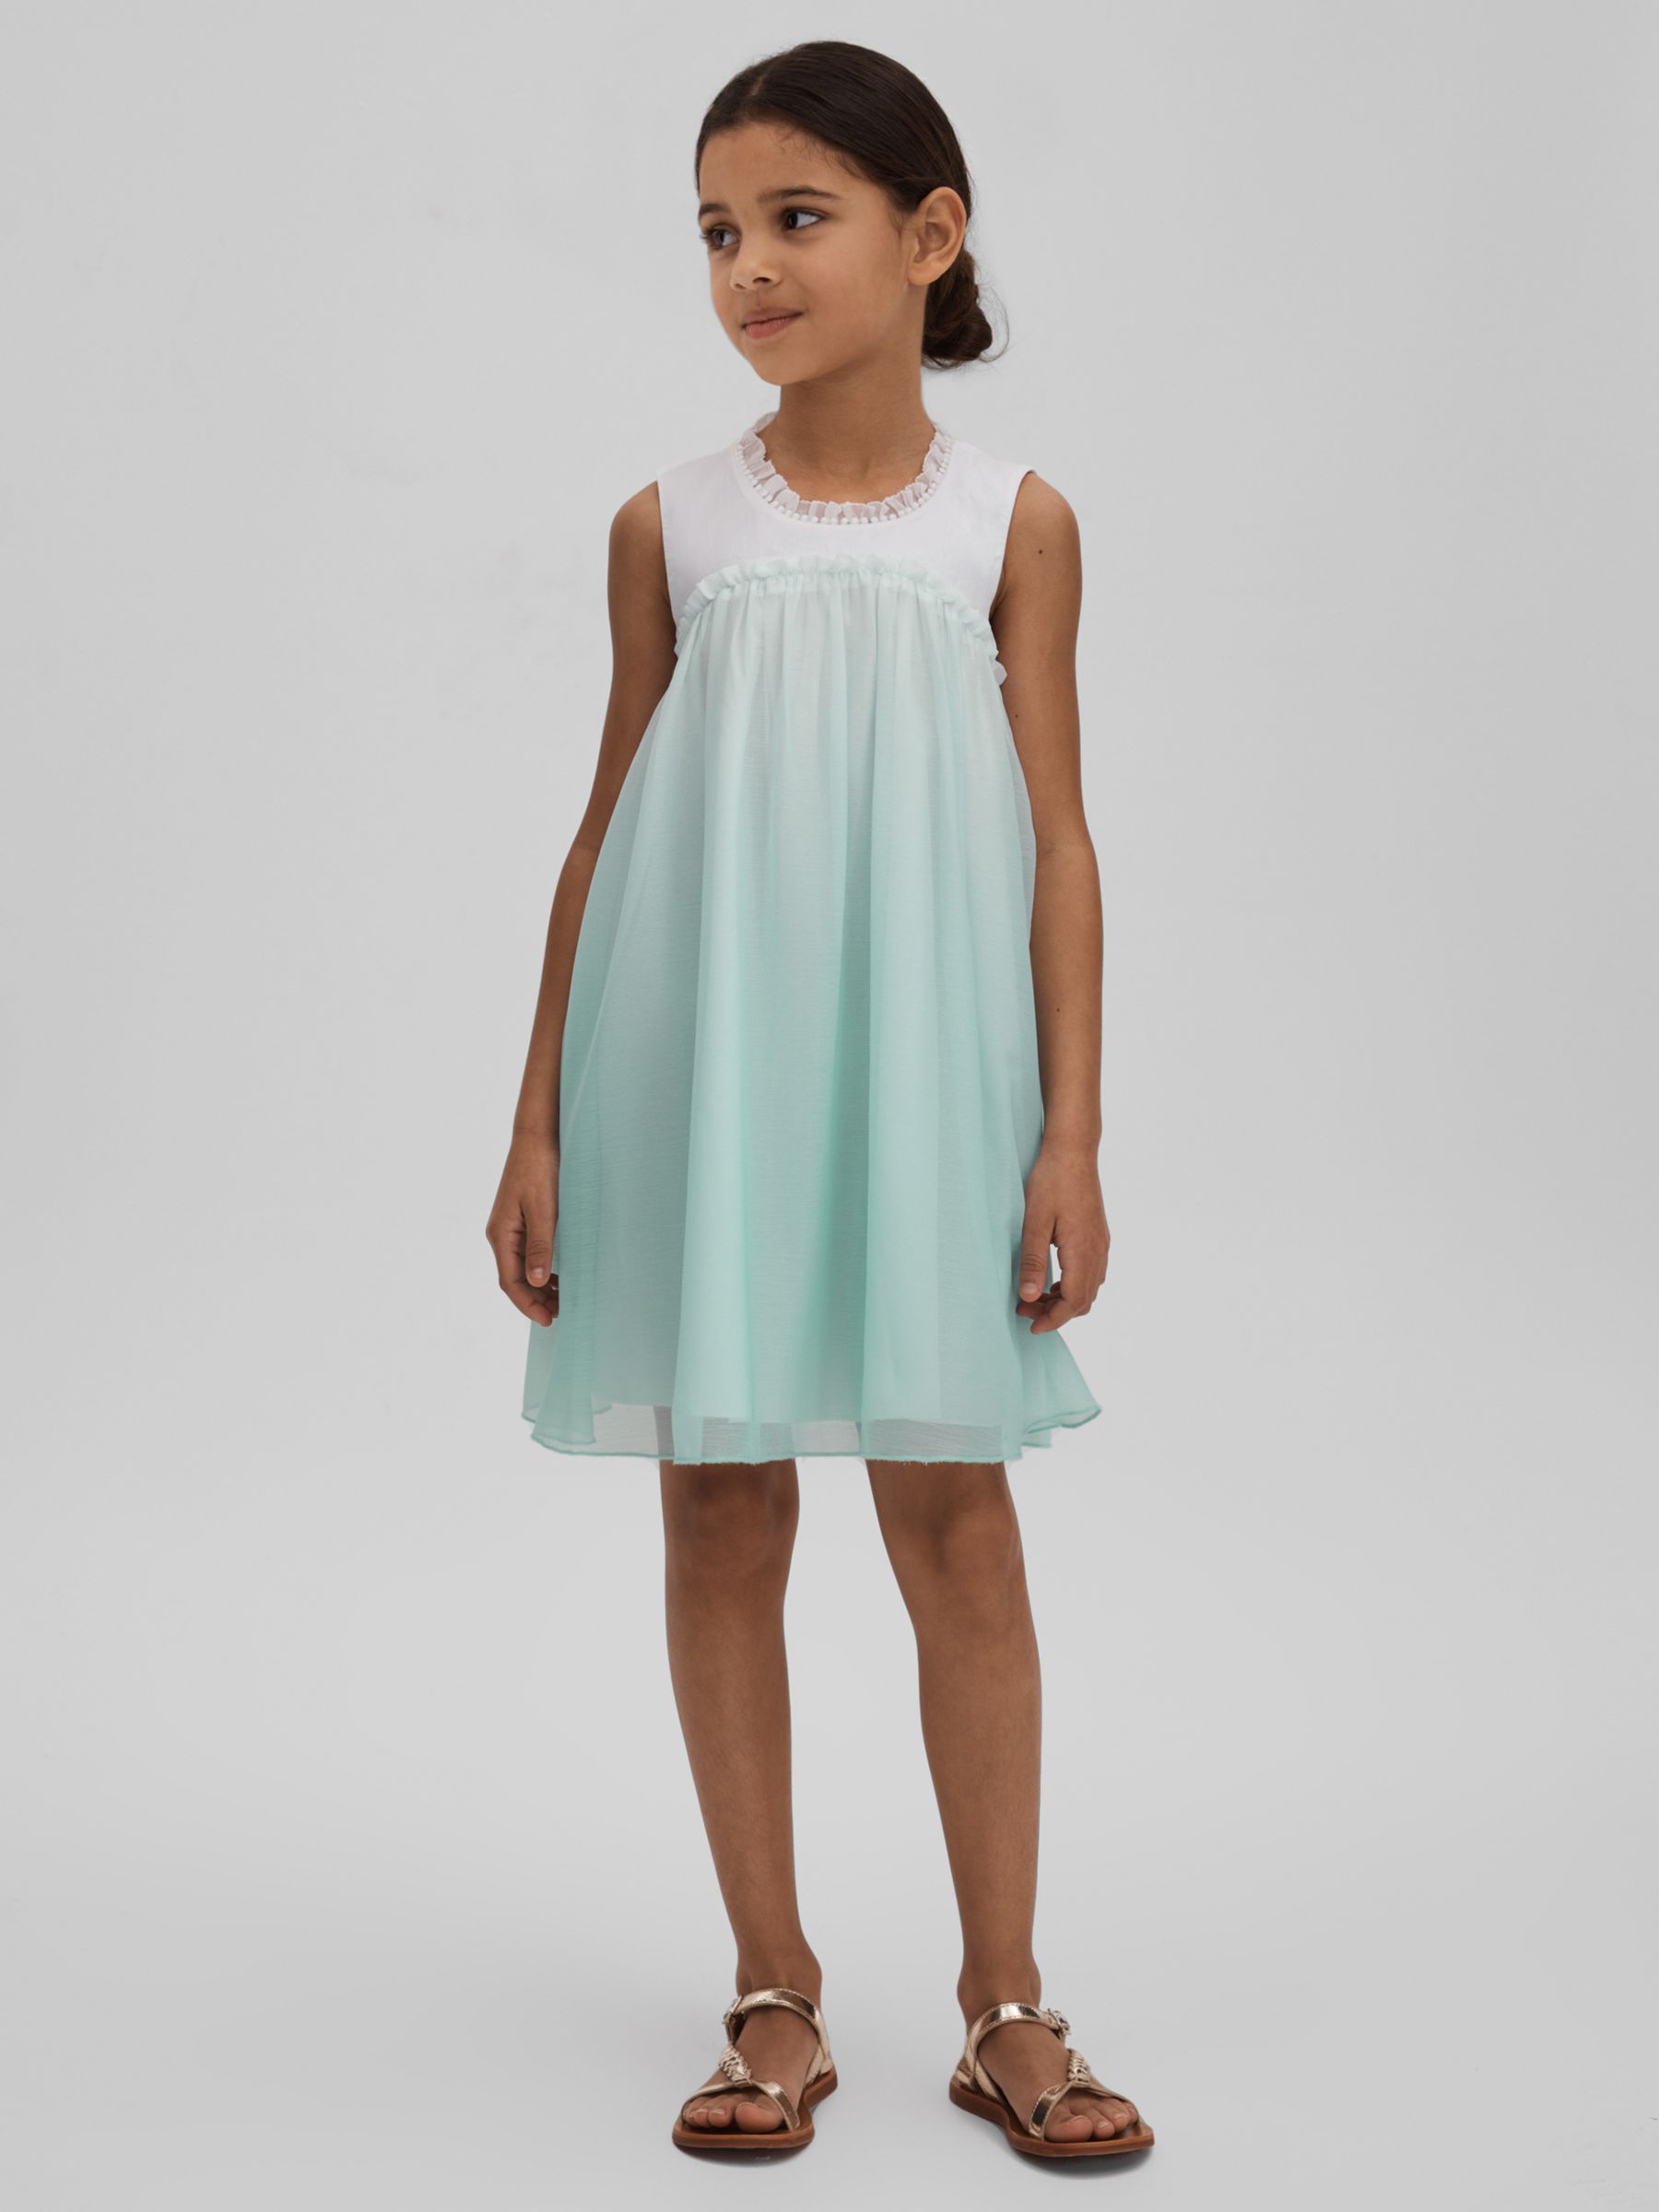 Reiss Kids' Coco Ombre Tulle Tired Dress, Blue, 4-5 years